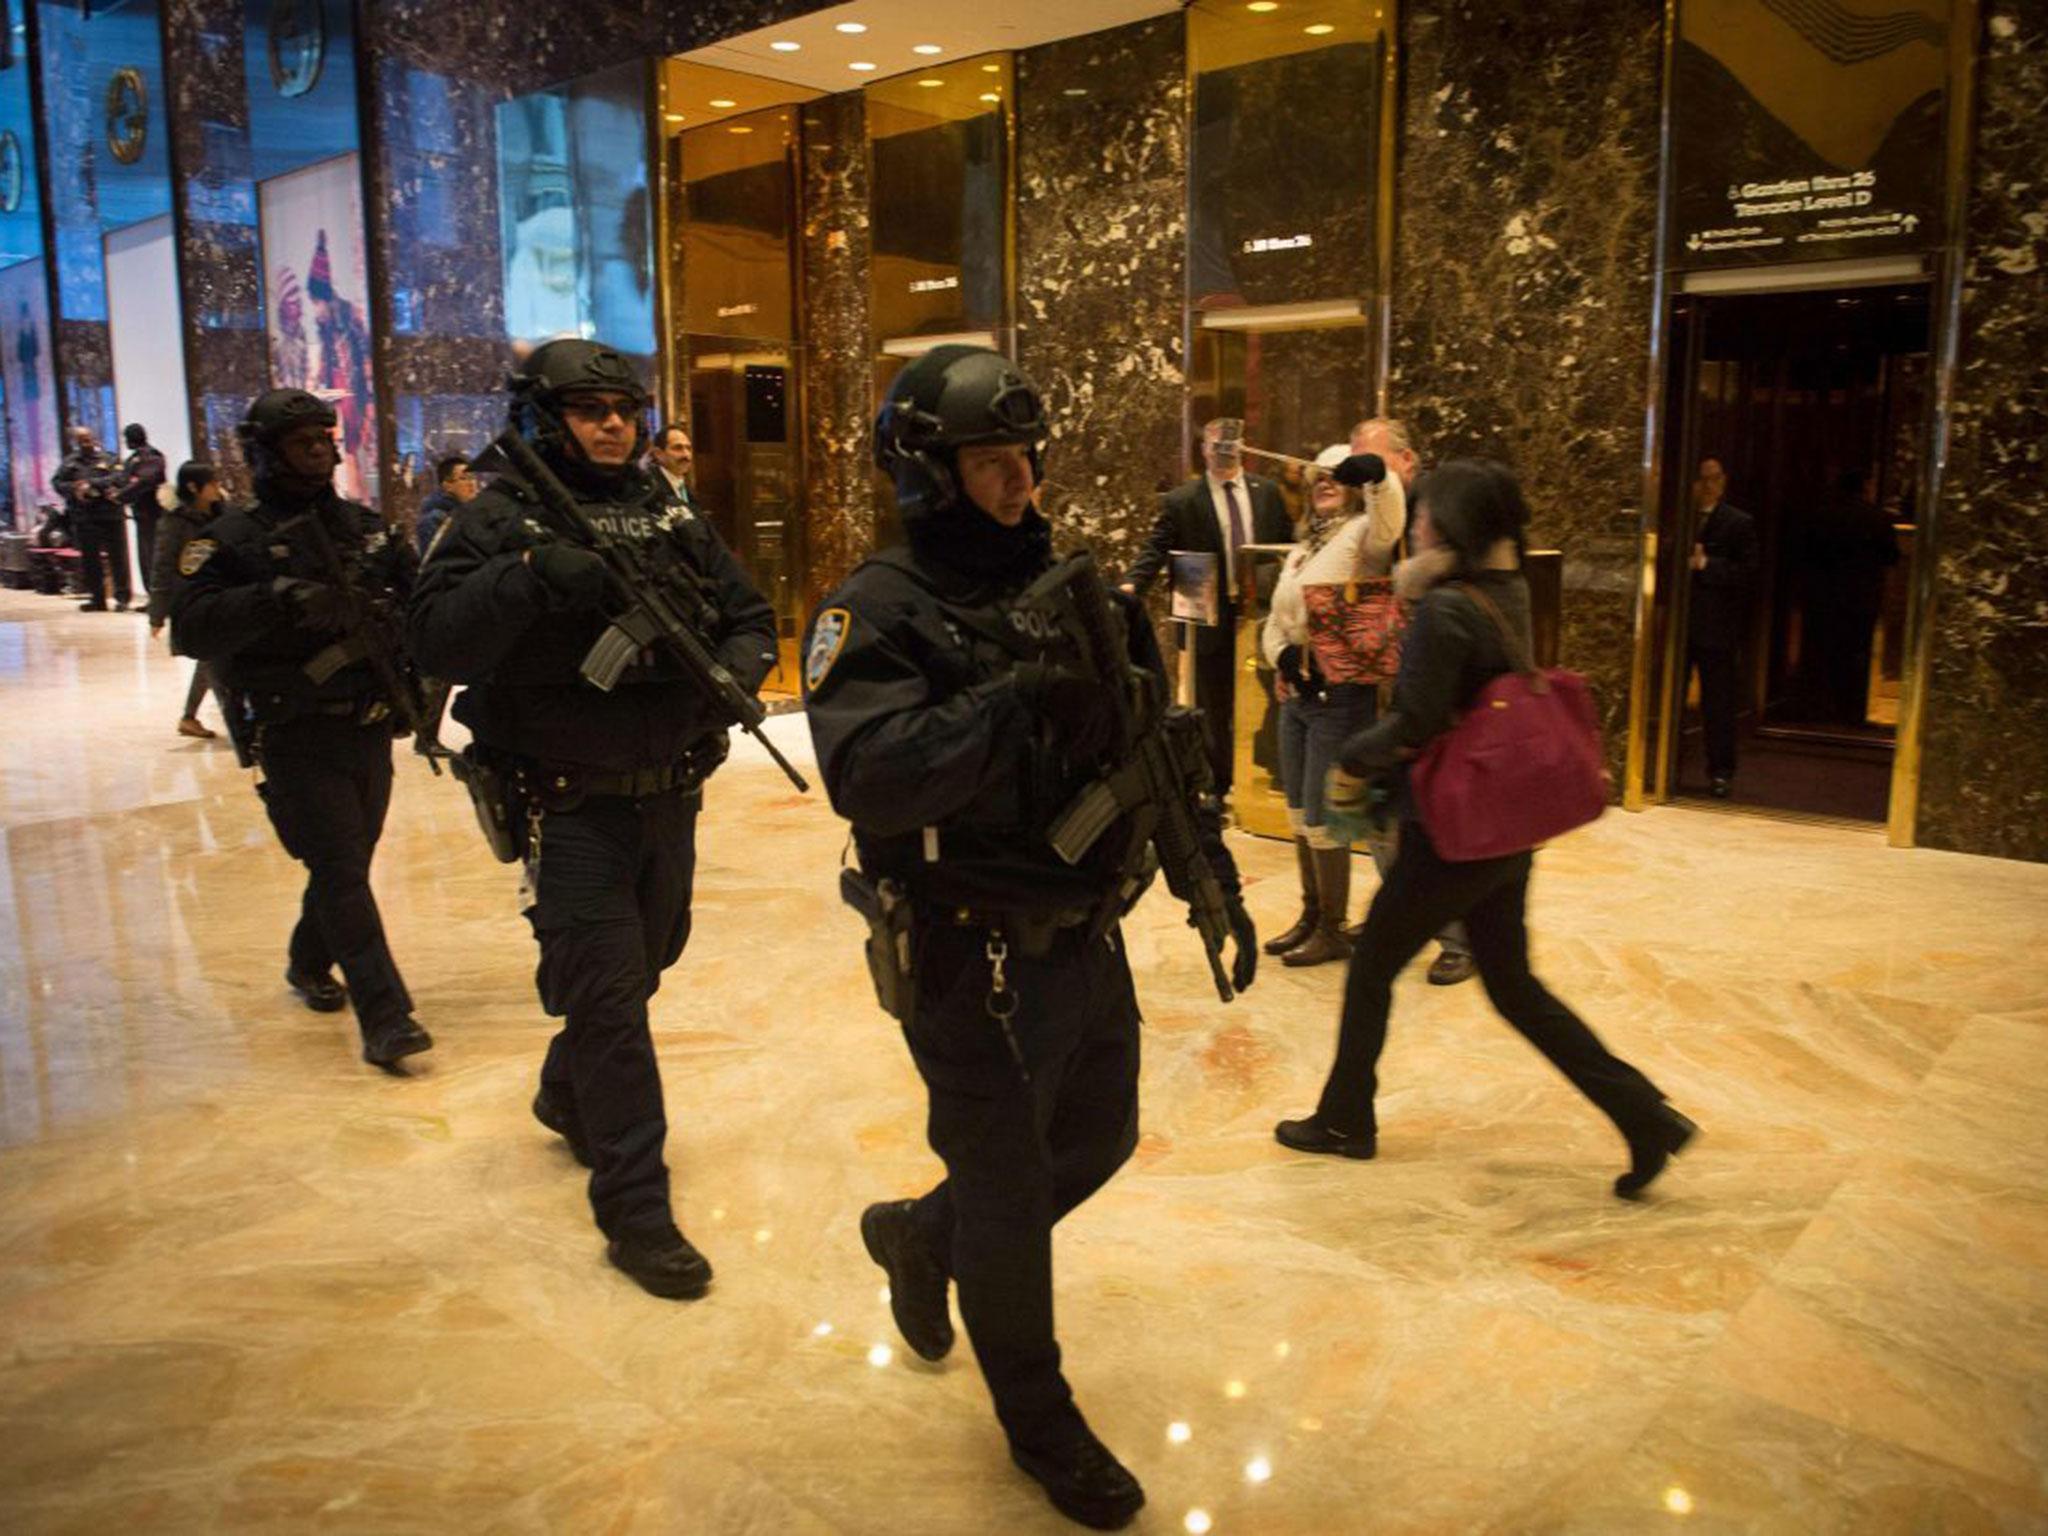 Heavily armed police walk through the lobby of Trump Tower